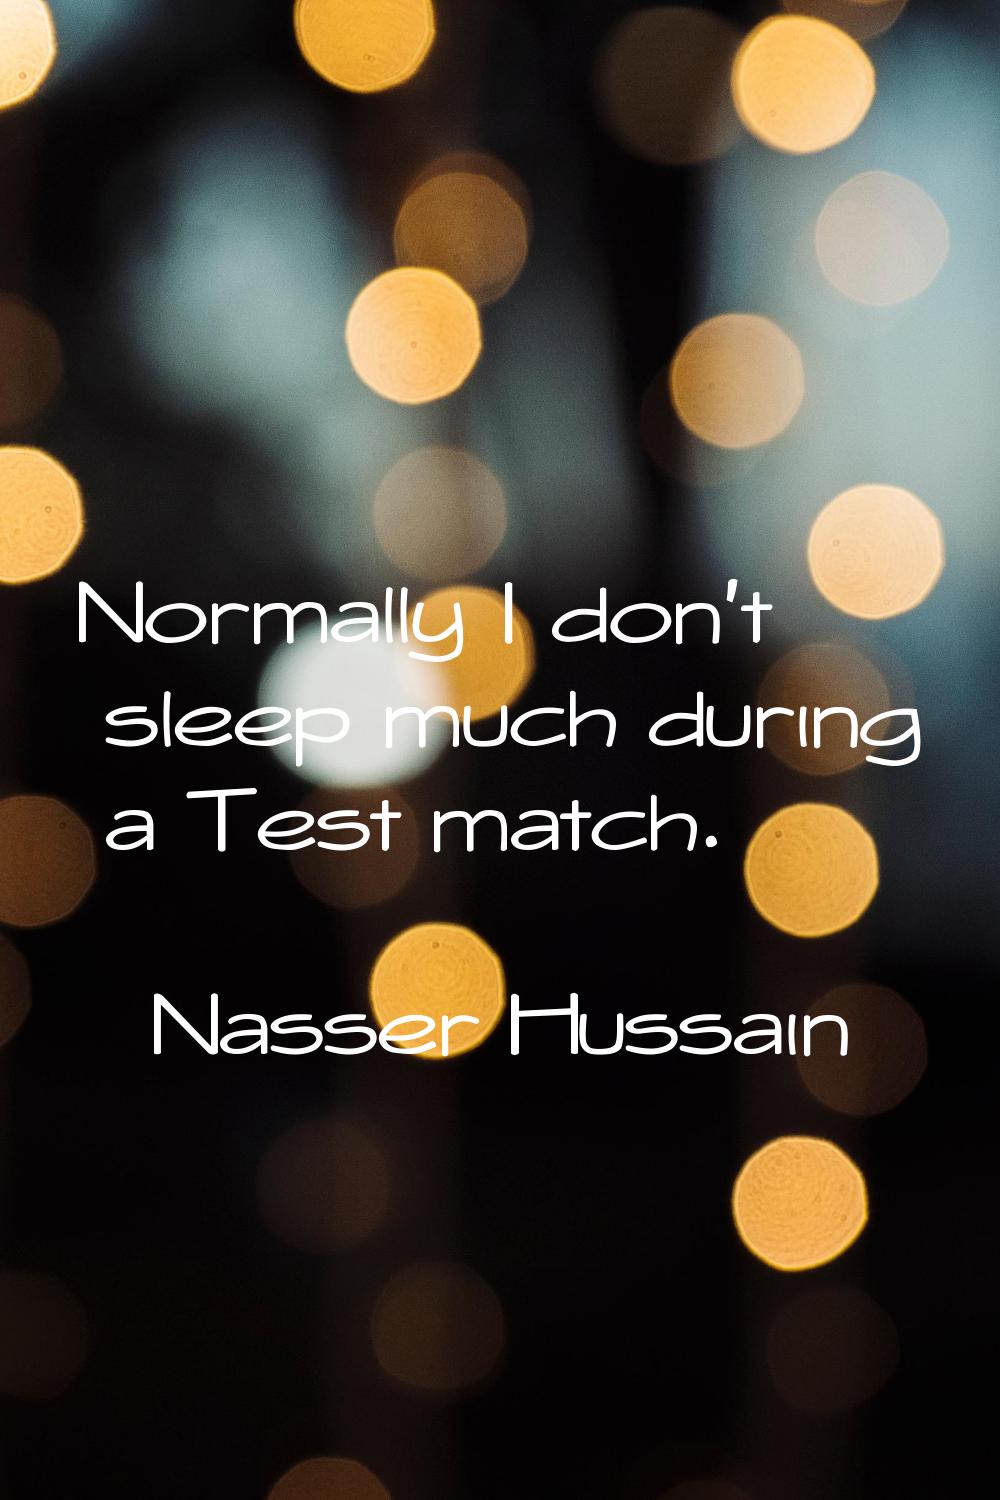 Normally I don't sleep much during a Test match.